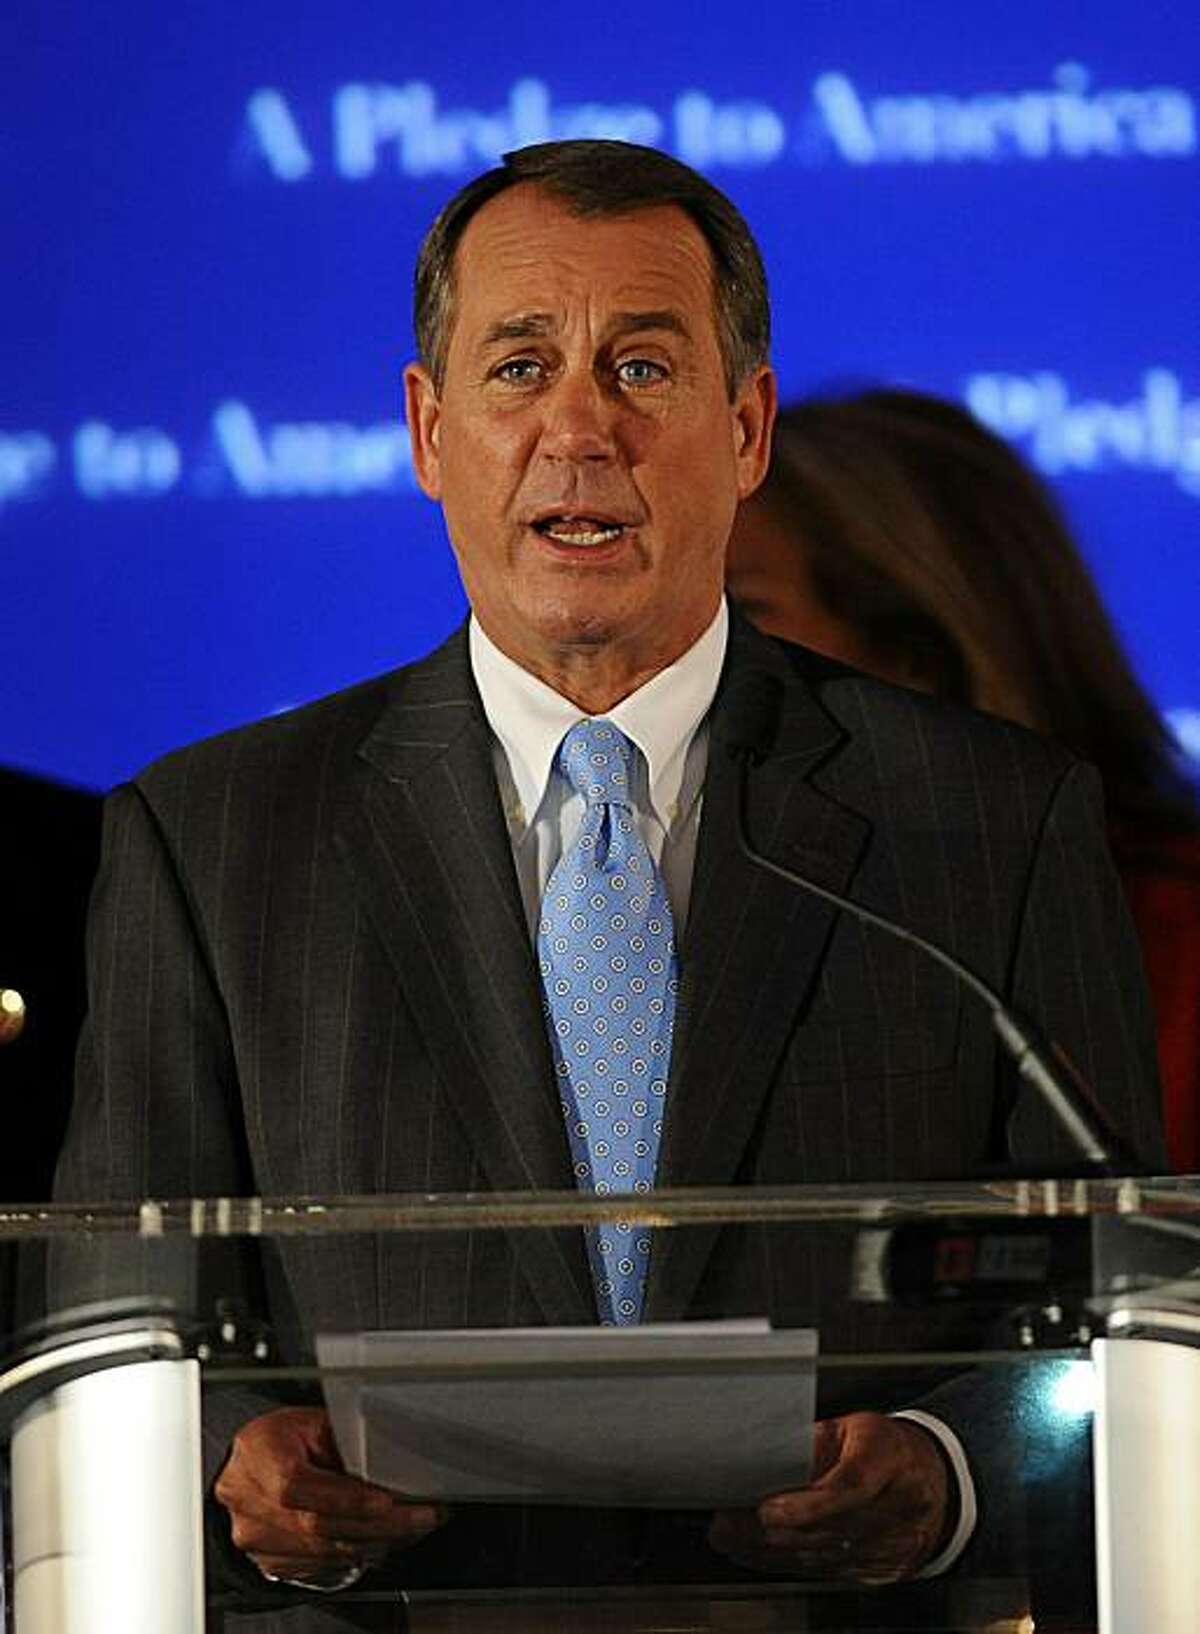 House Republican leader John Boehner, R-OH, speaks during the National Republican Congressional Committee Election Night Results Watch event in Washington, DC, on November 2, 2010. An emotional John Boehner, the presumed speaker-elect of the US House ofRepresentatives, told fellow Republicans at the victory party that Americans have sent President Obama message to 'change course'.